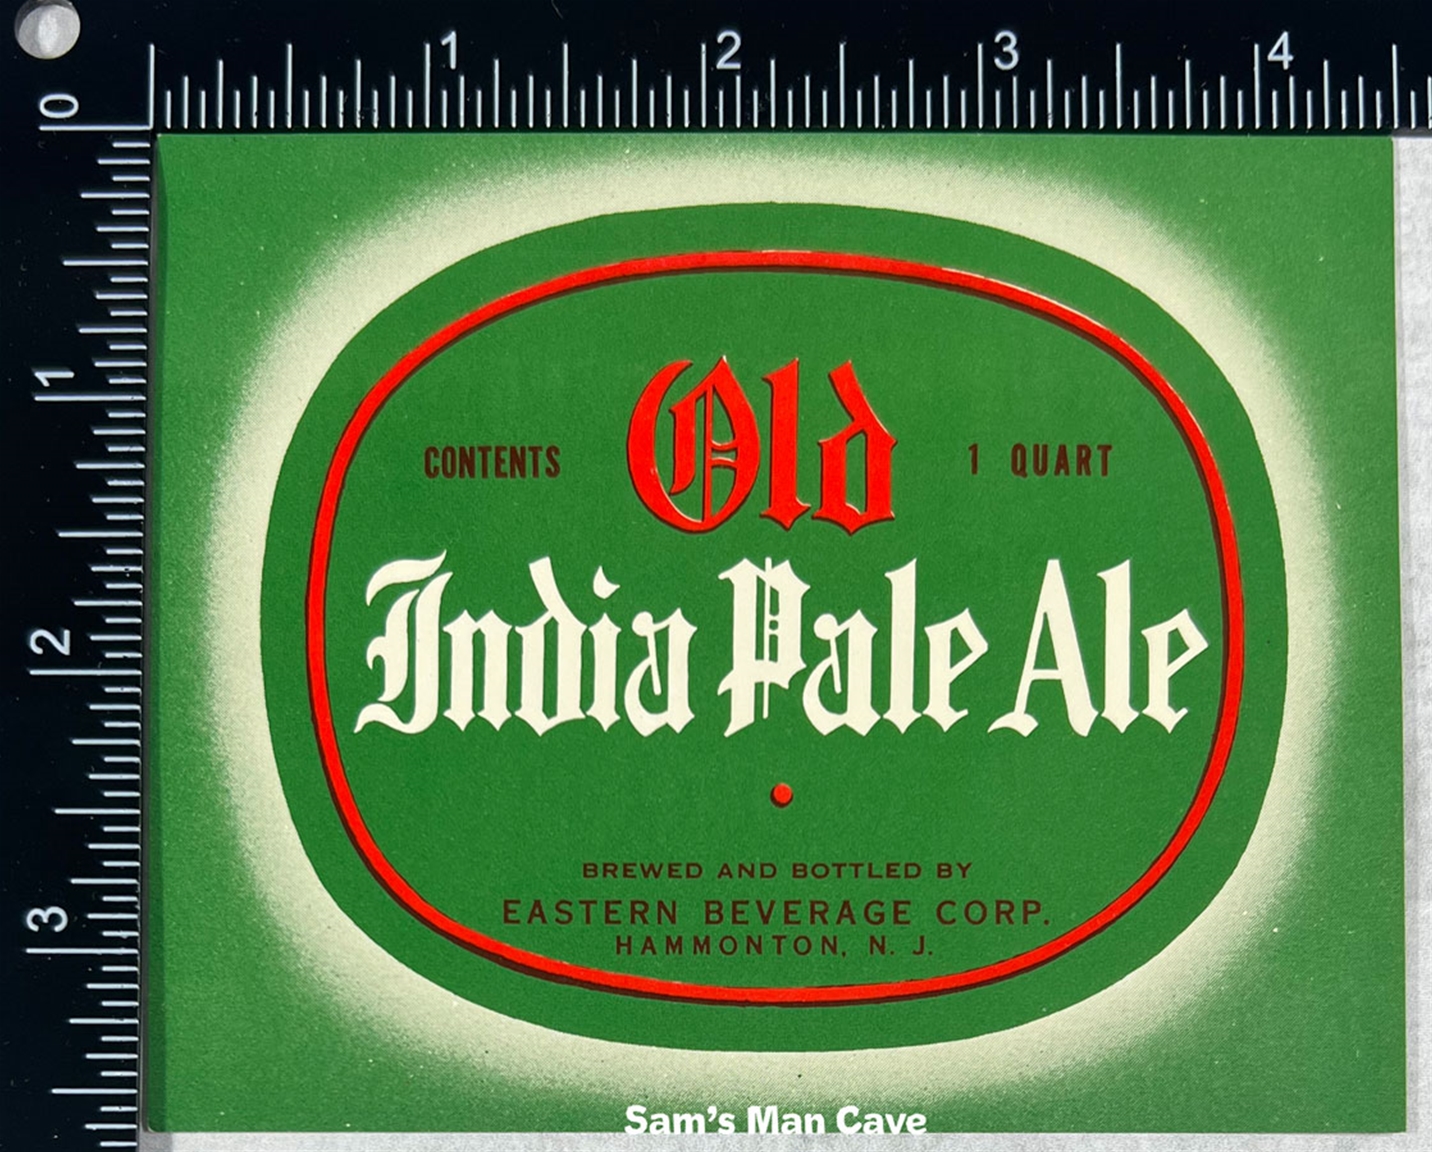 Old India Pale Ale Beer Label